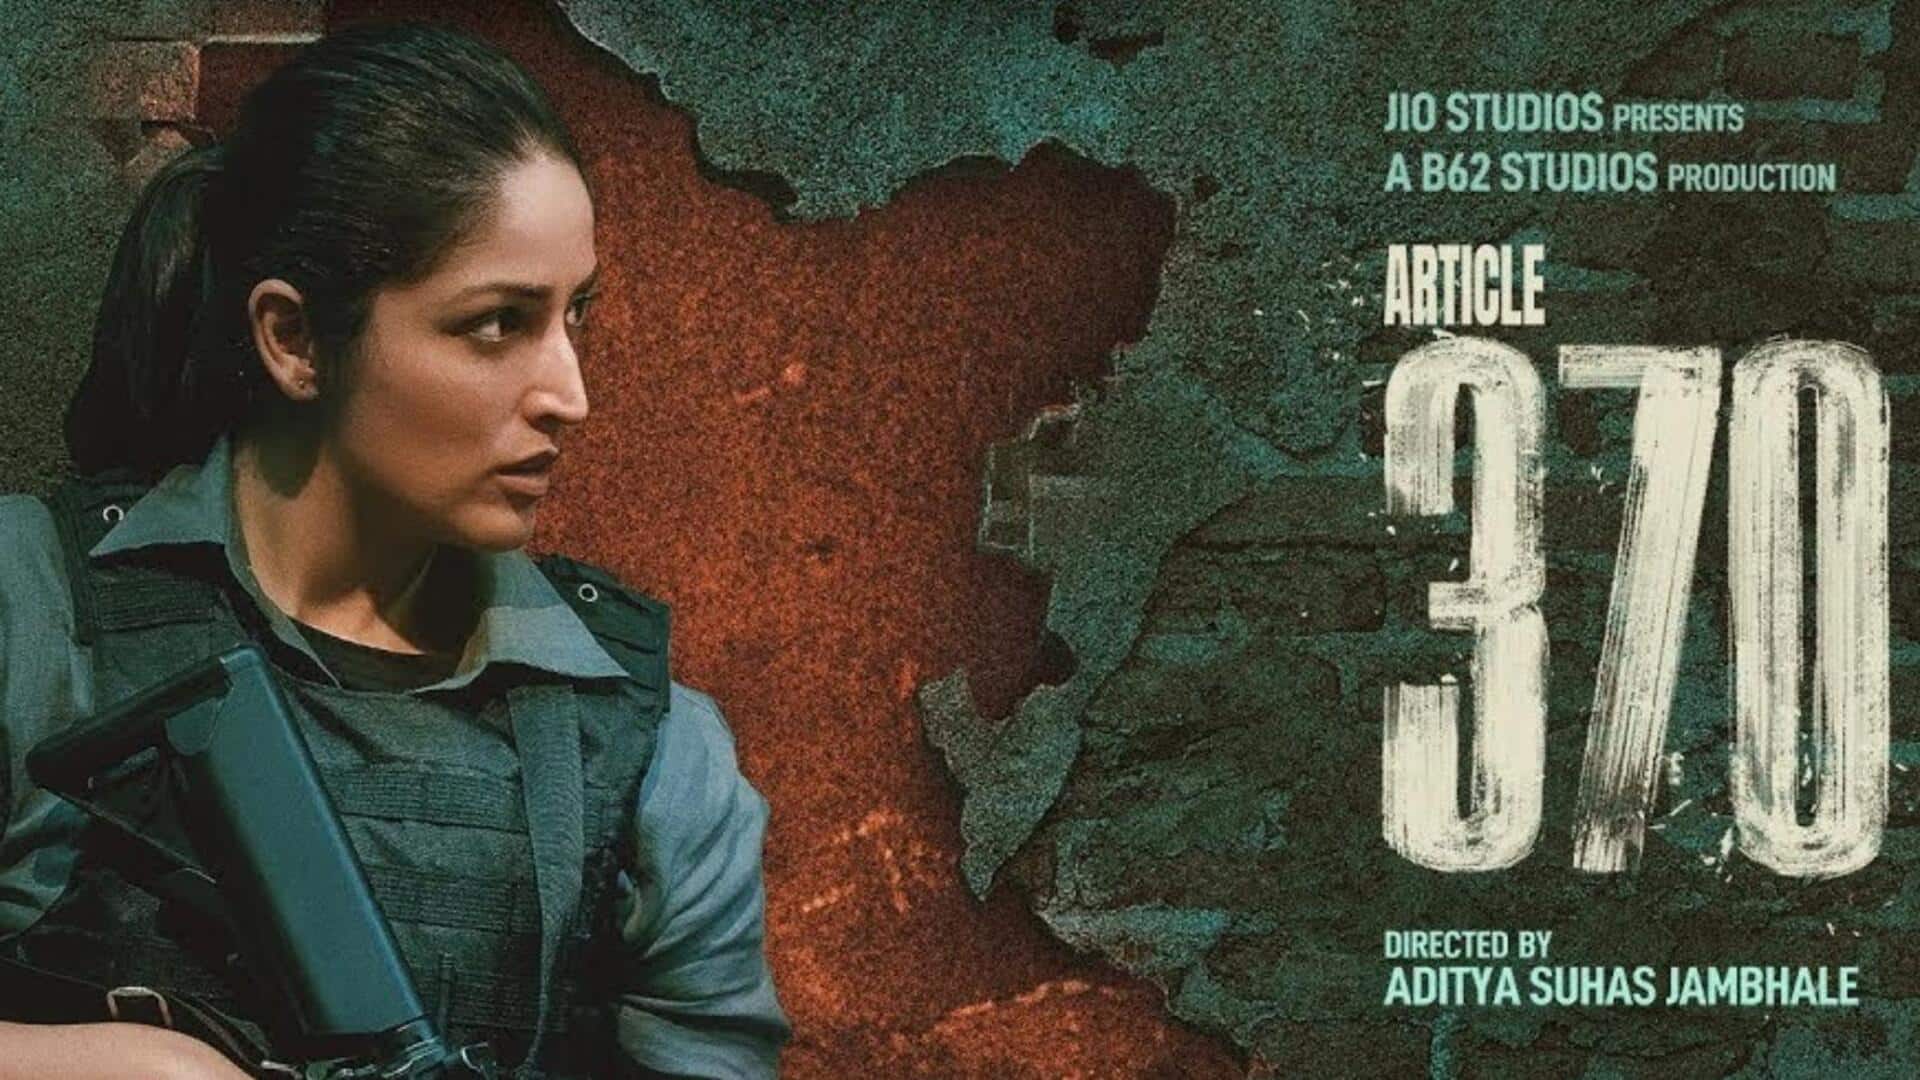 Box office collection: 'Article 370' gears up for lucrative weekend